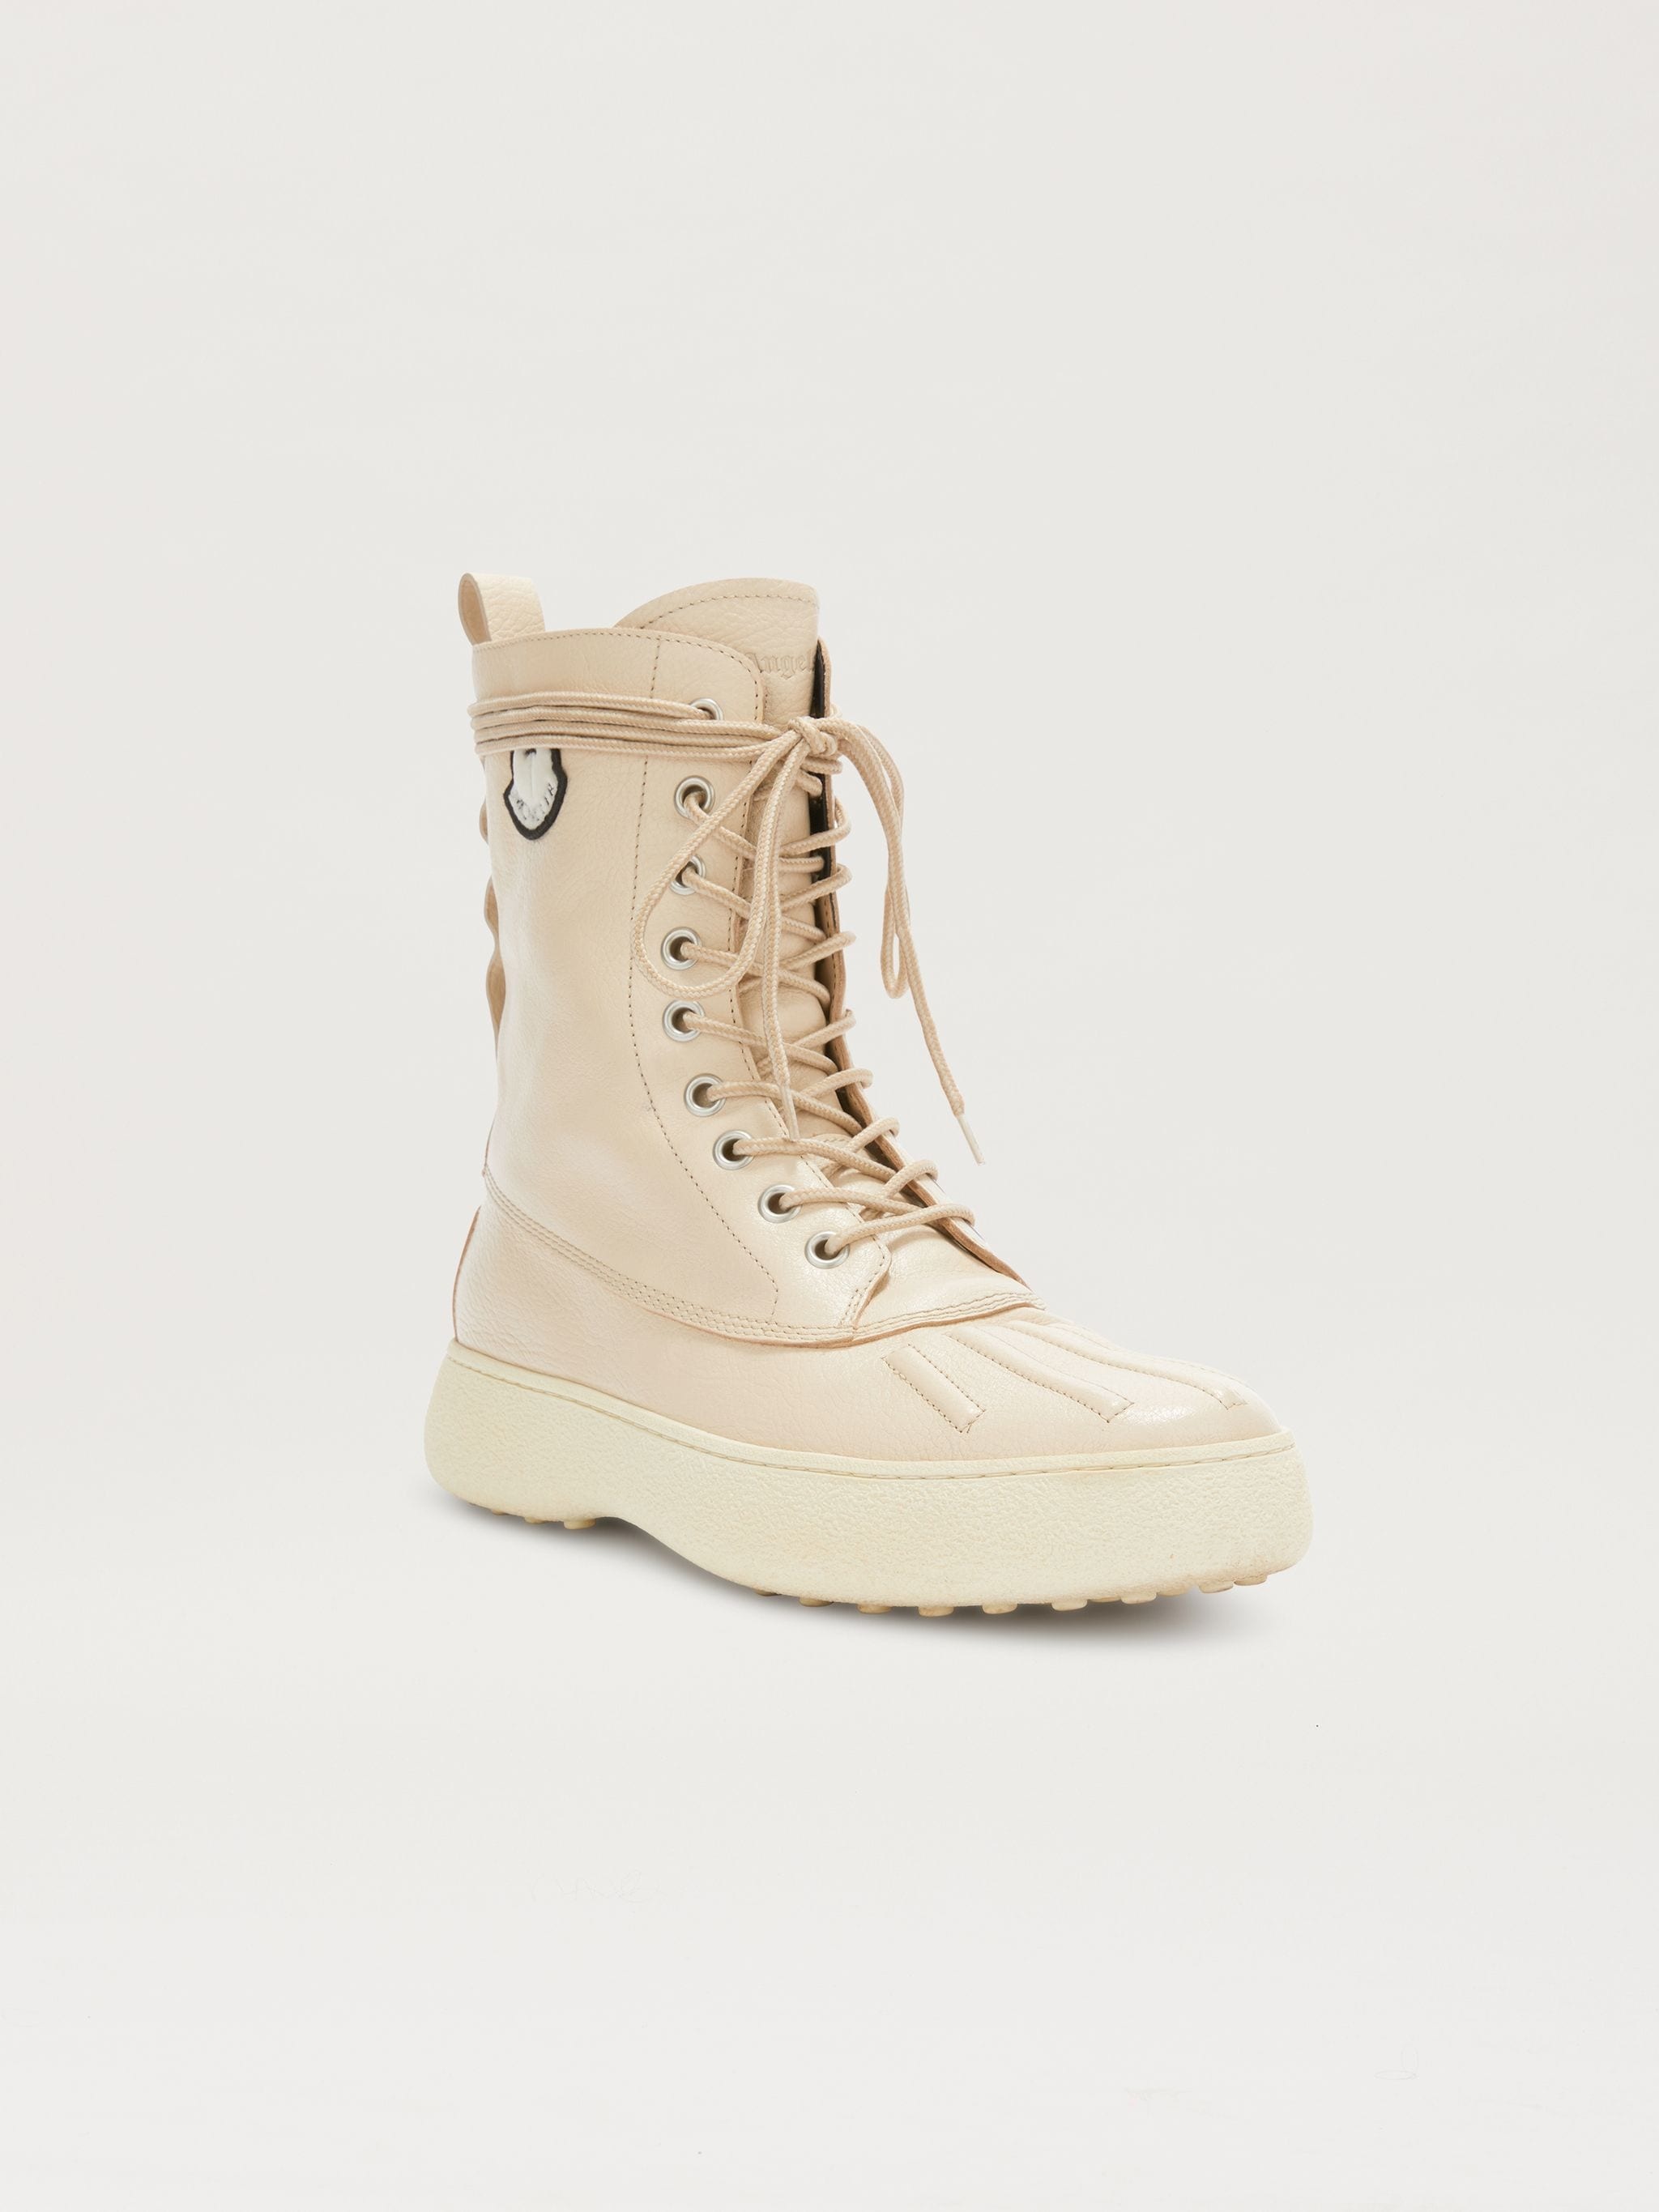 8 MONCLER PALM ANGELS WINTER GOMMINO HIGH - 4